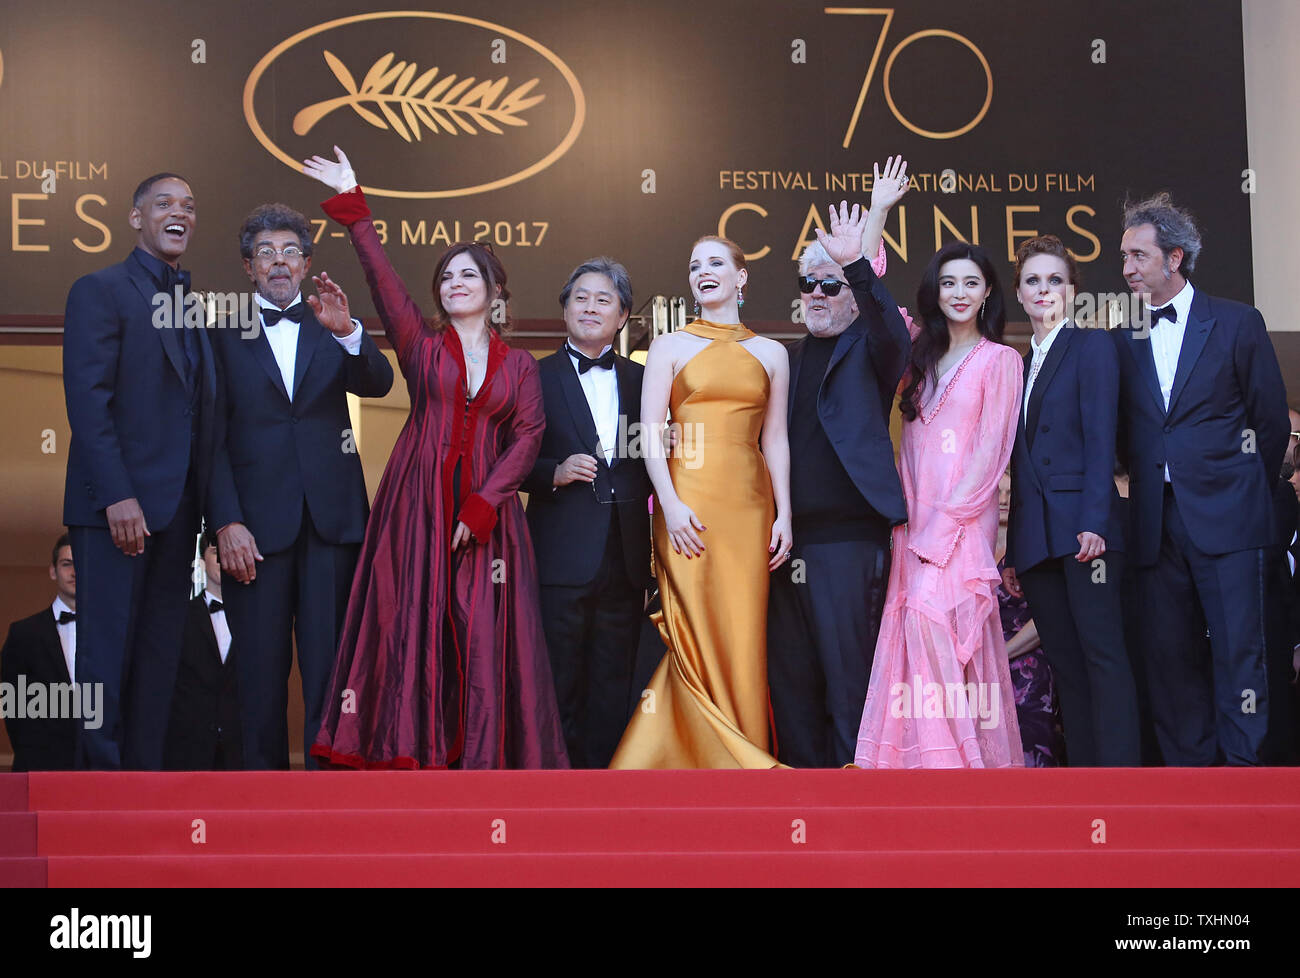 (From L to R) Jury members Will Smith, Gabriel Yared, Agnes Jaoui, SPark Chan-wook, Jessica Chastain, Pedro Almodovar, Fan Bingbing, Maren Ade and Paolo Sorrentino arrive on the red carpet celebrating the 70th anniversary of the Cannes International Film Festival in Cannes, France on May 23, 2017.  Photo by David Silpa/UPI Stock Photo